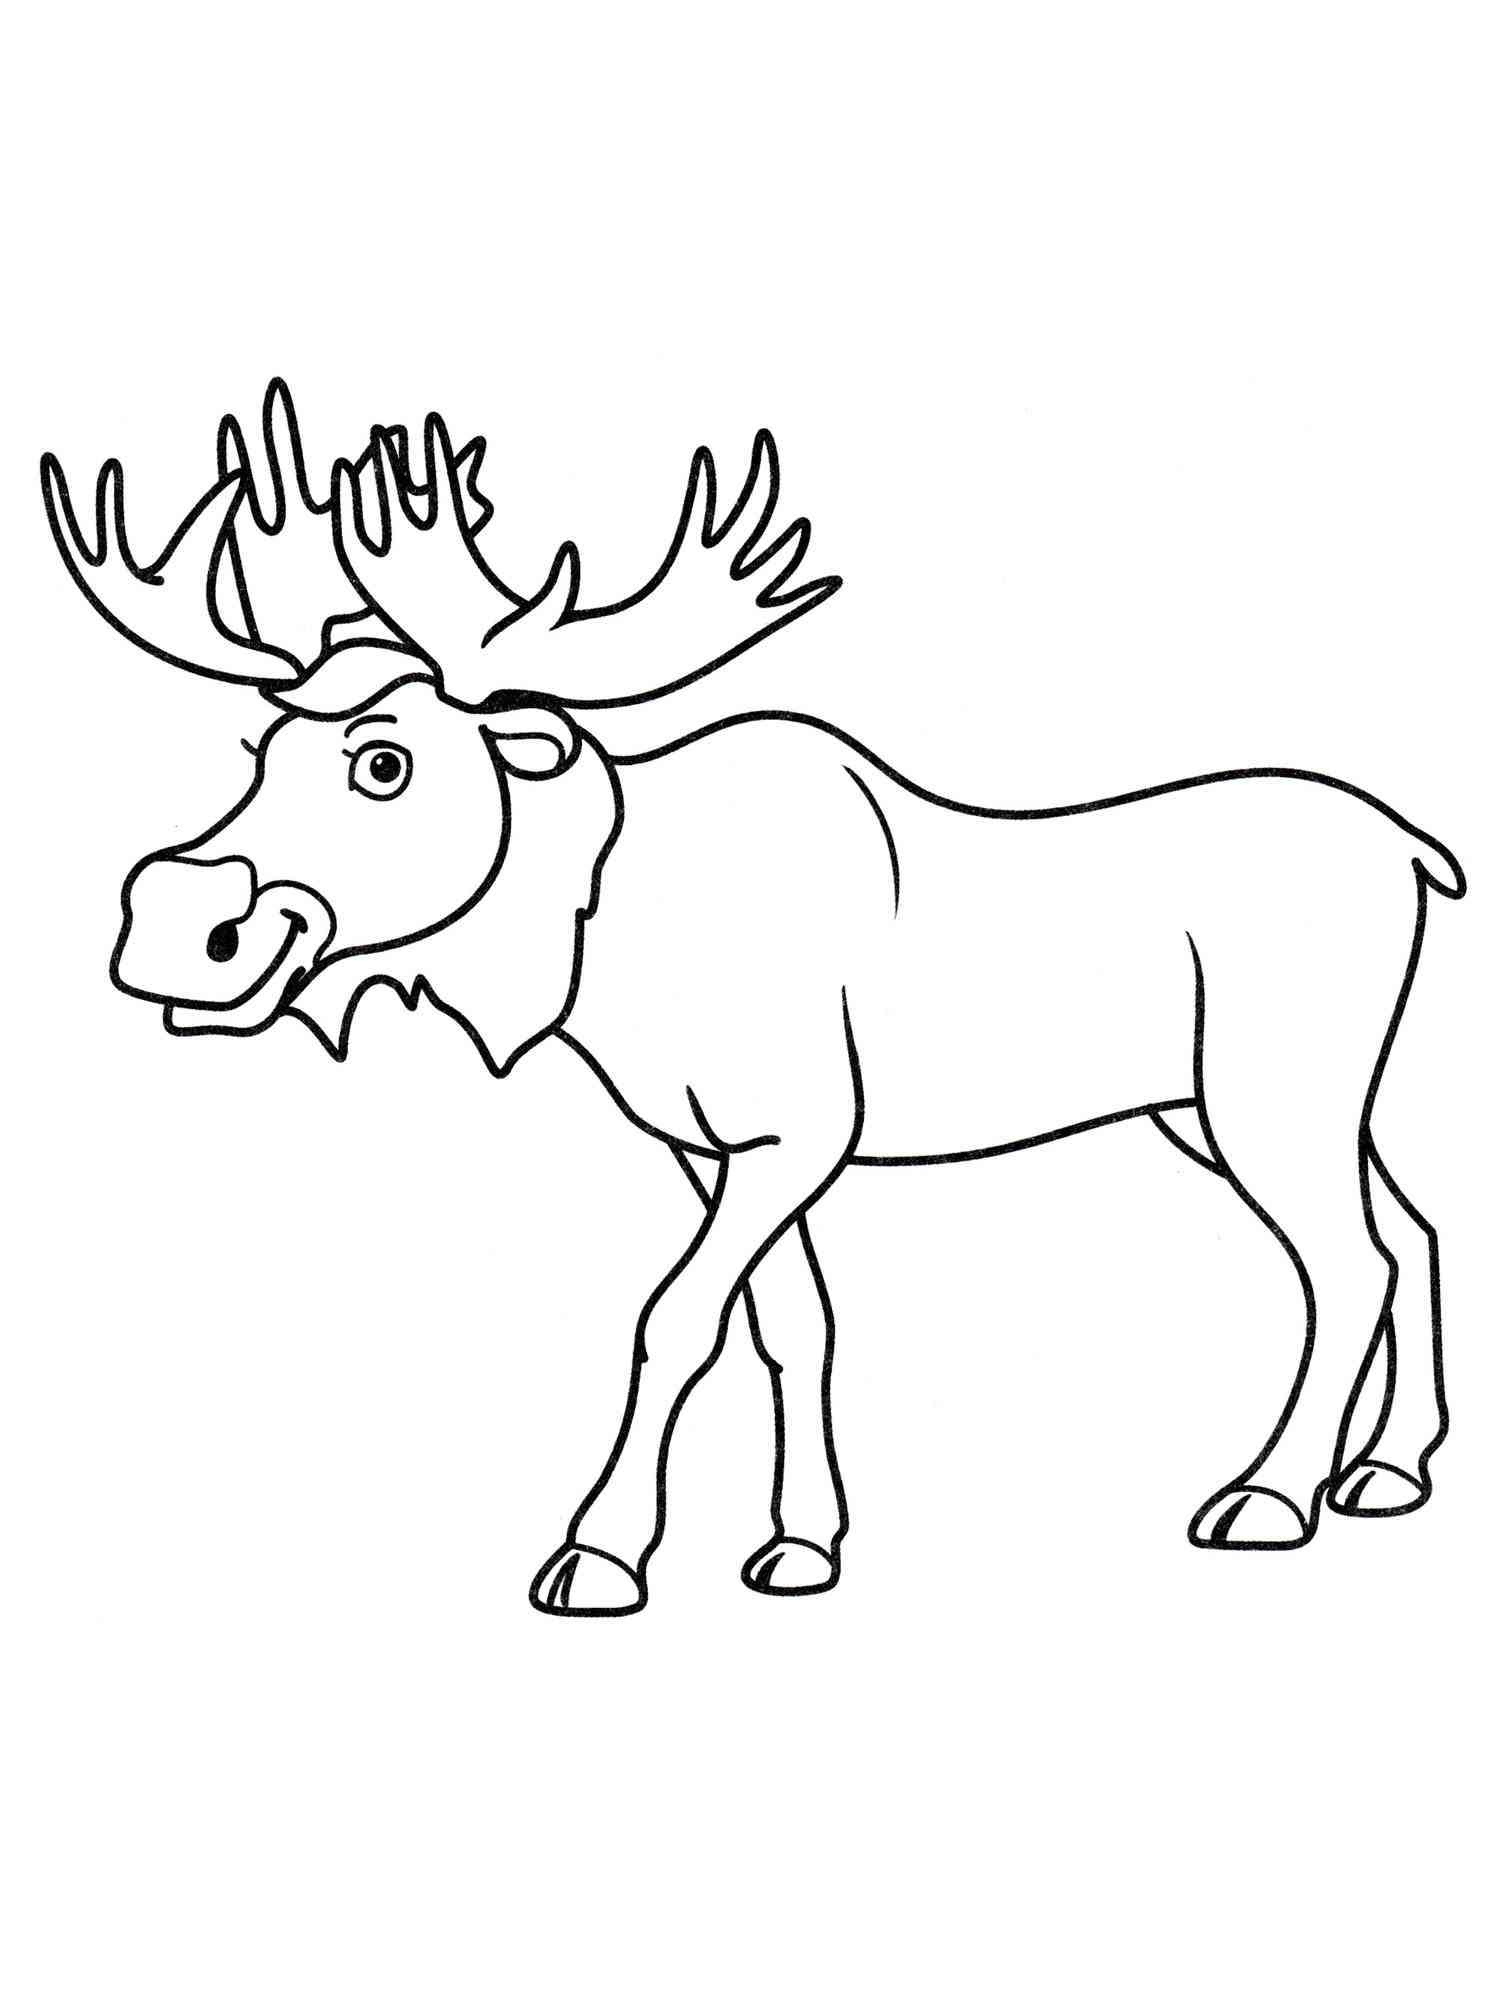 Simple Moose coloring page